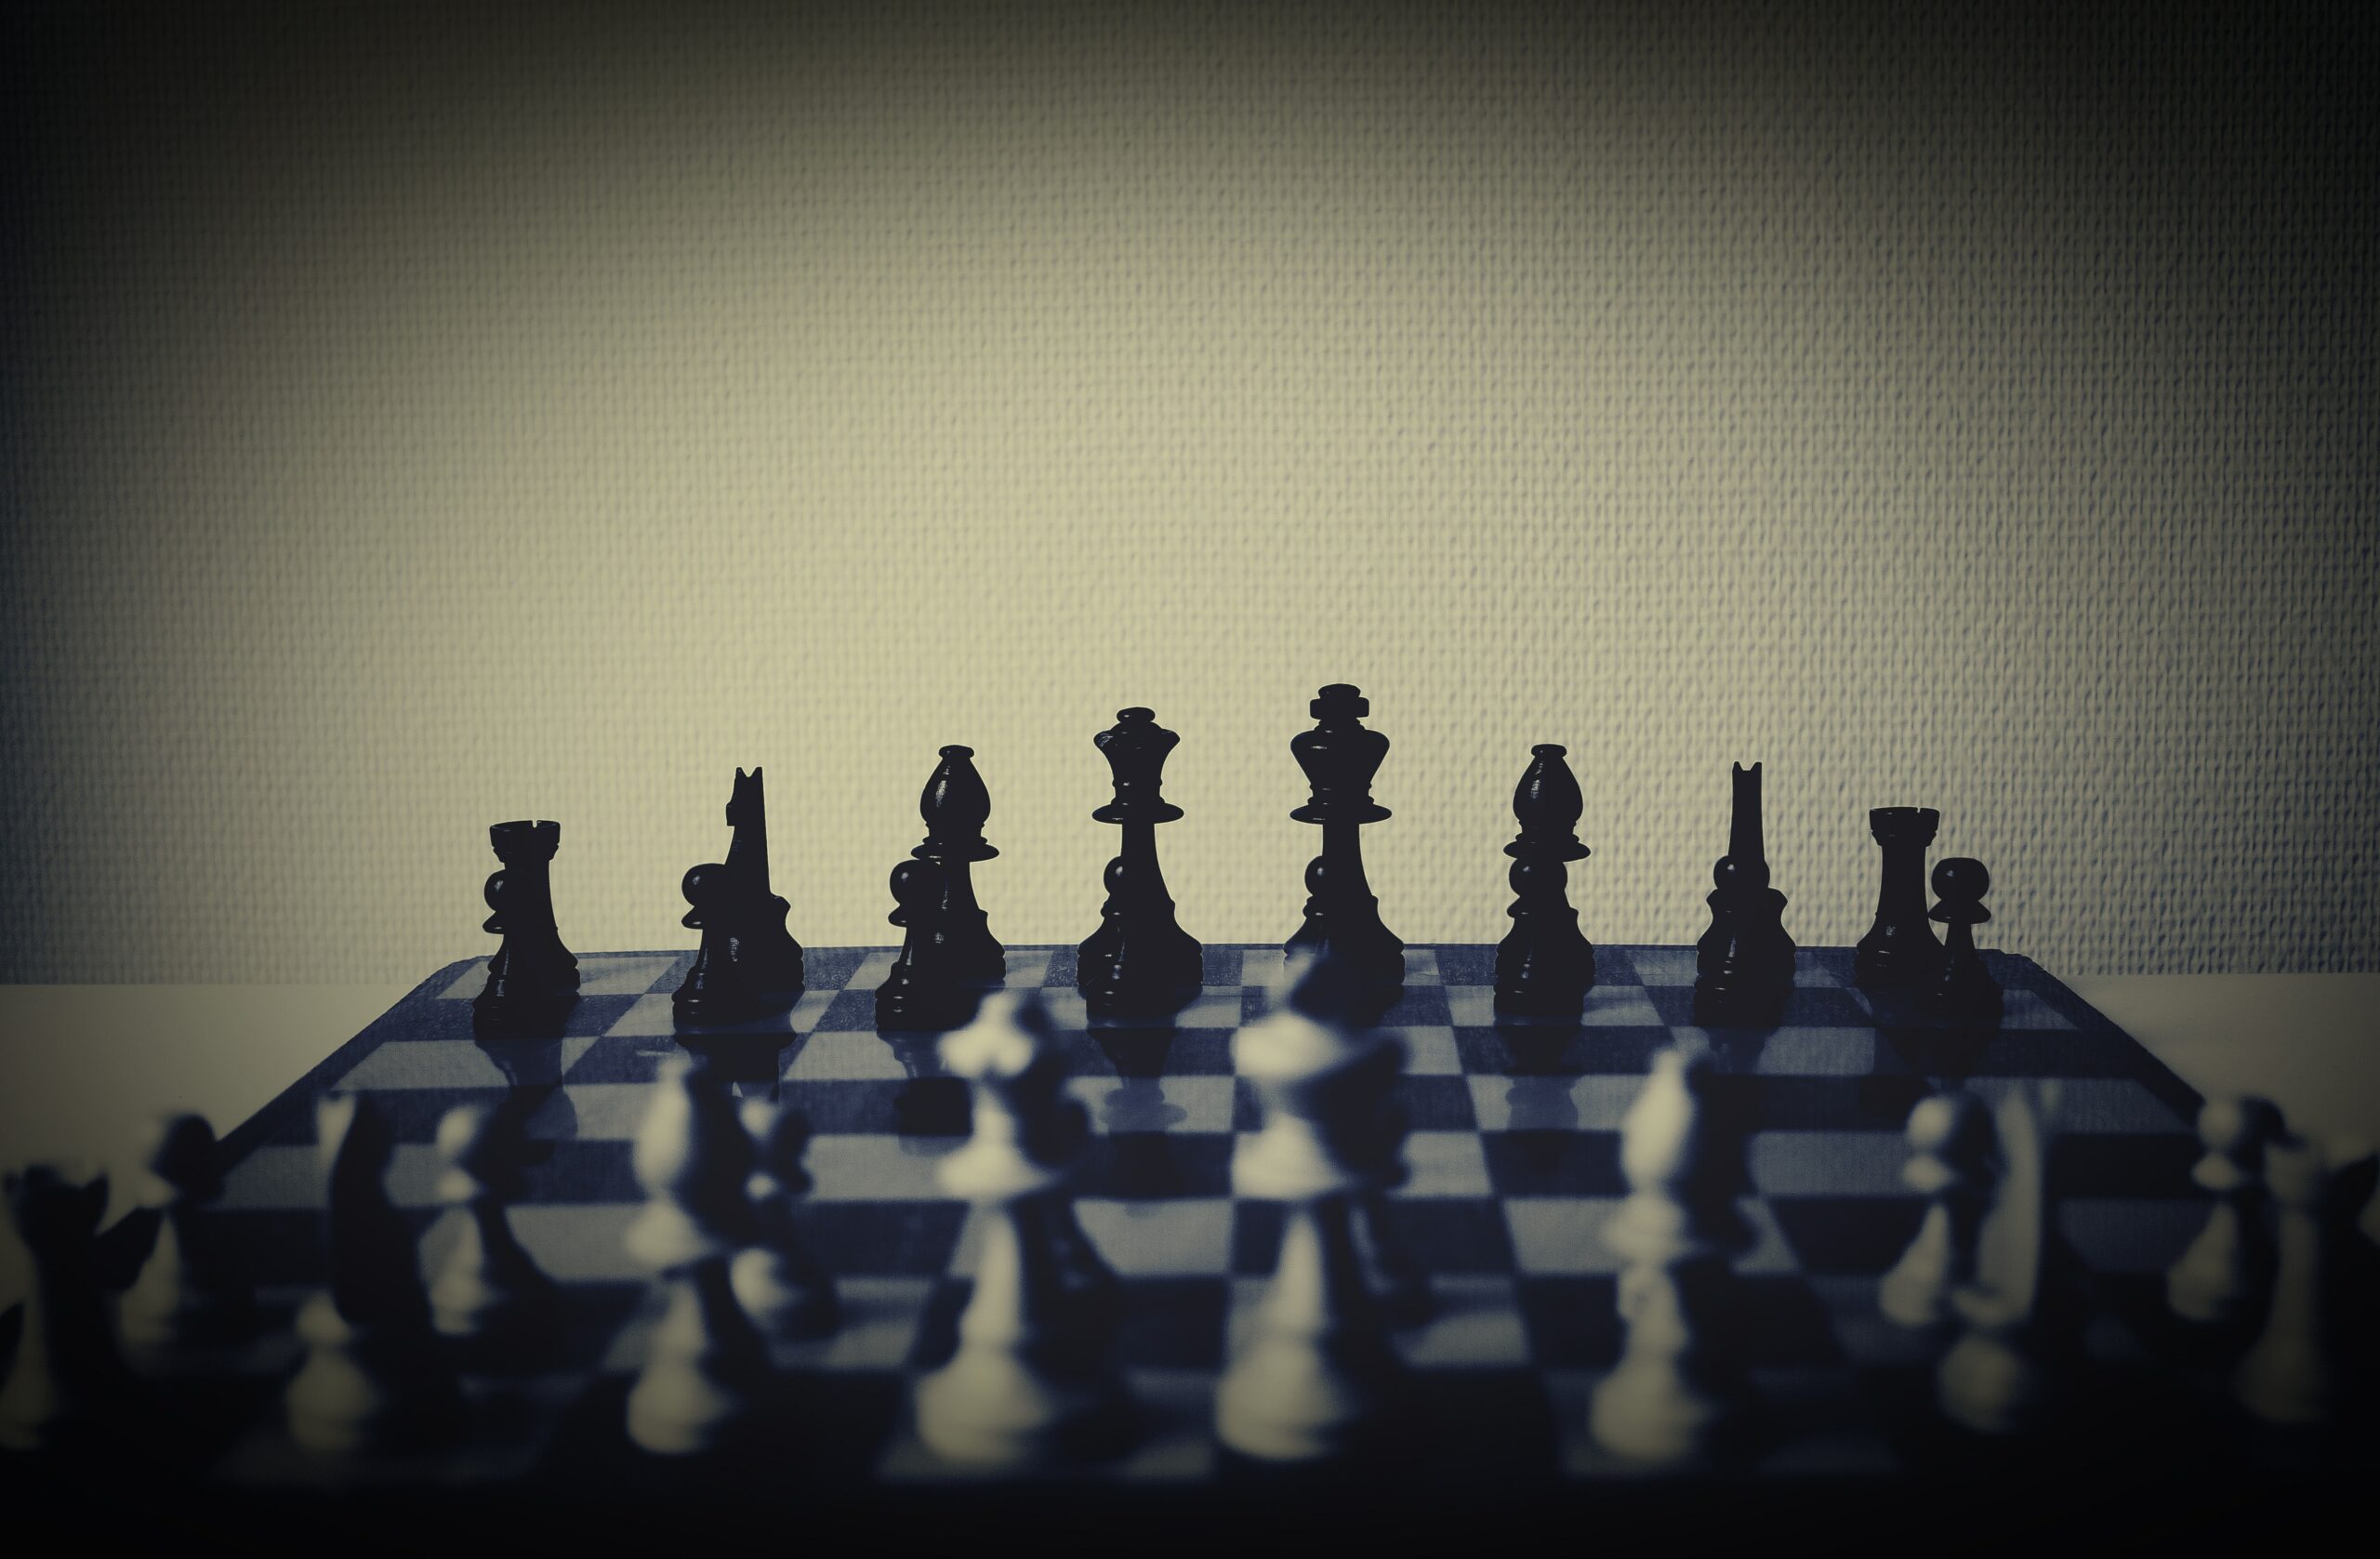 strategic thinking and decision-making skills in chess